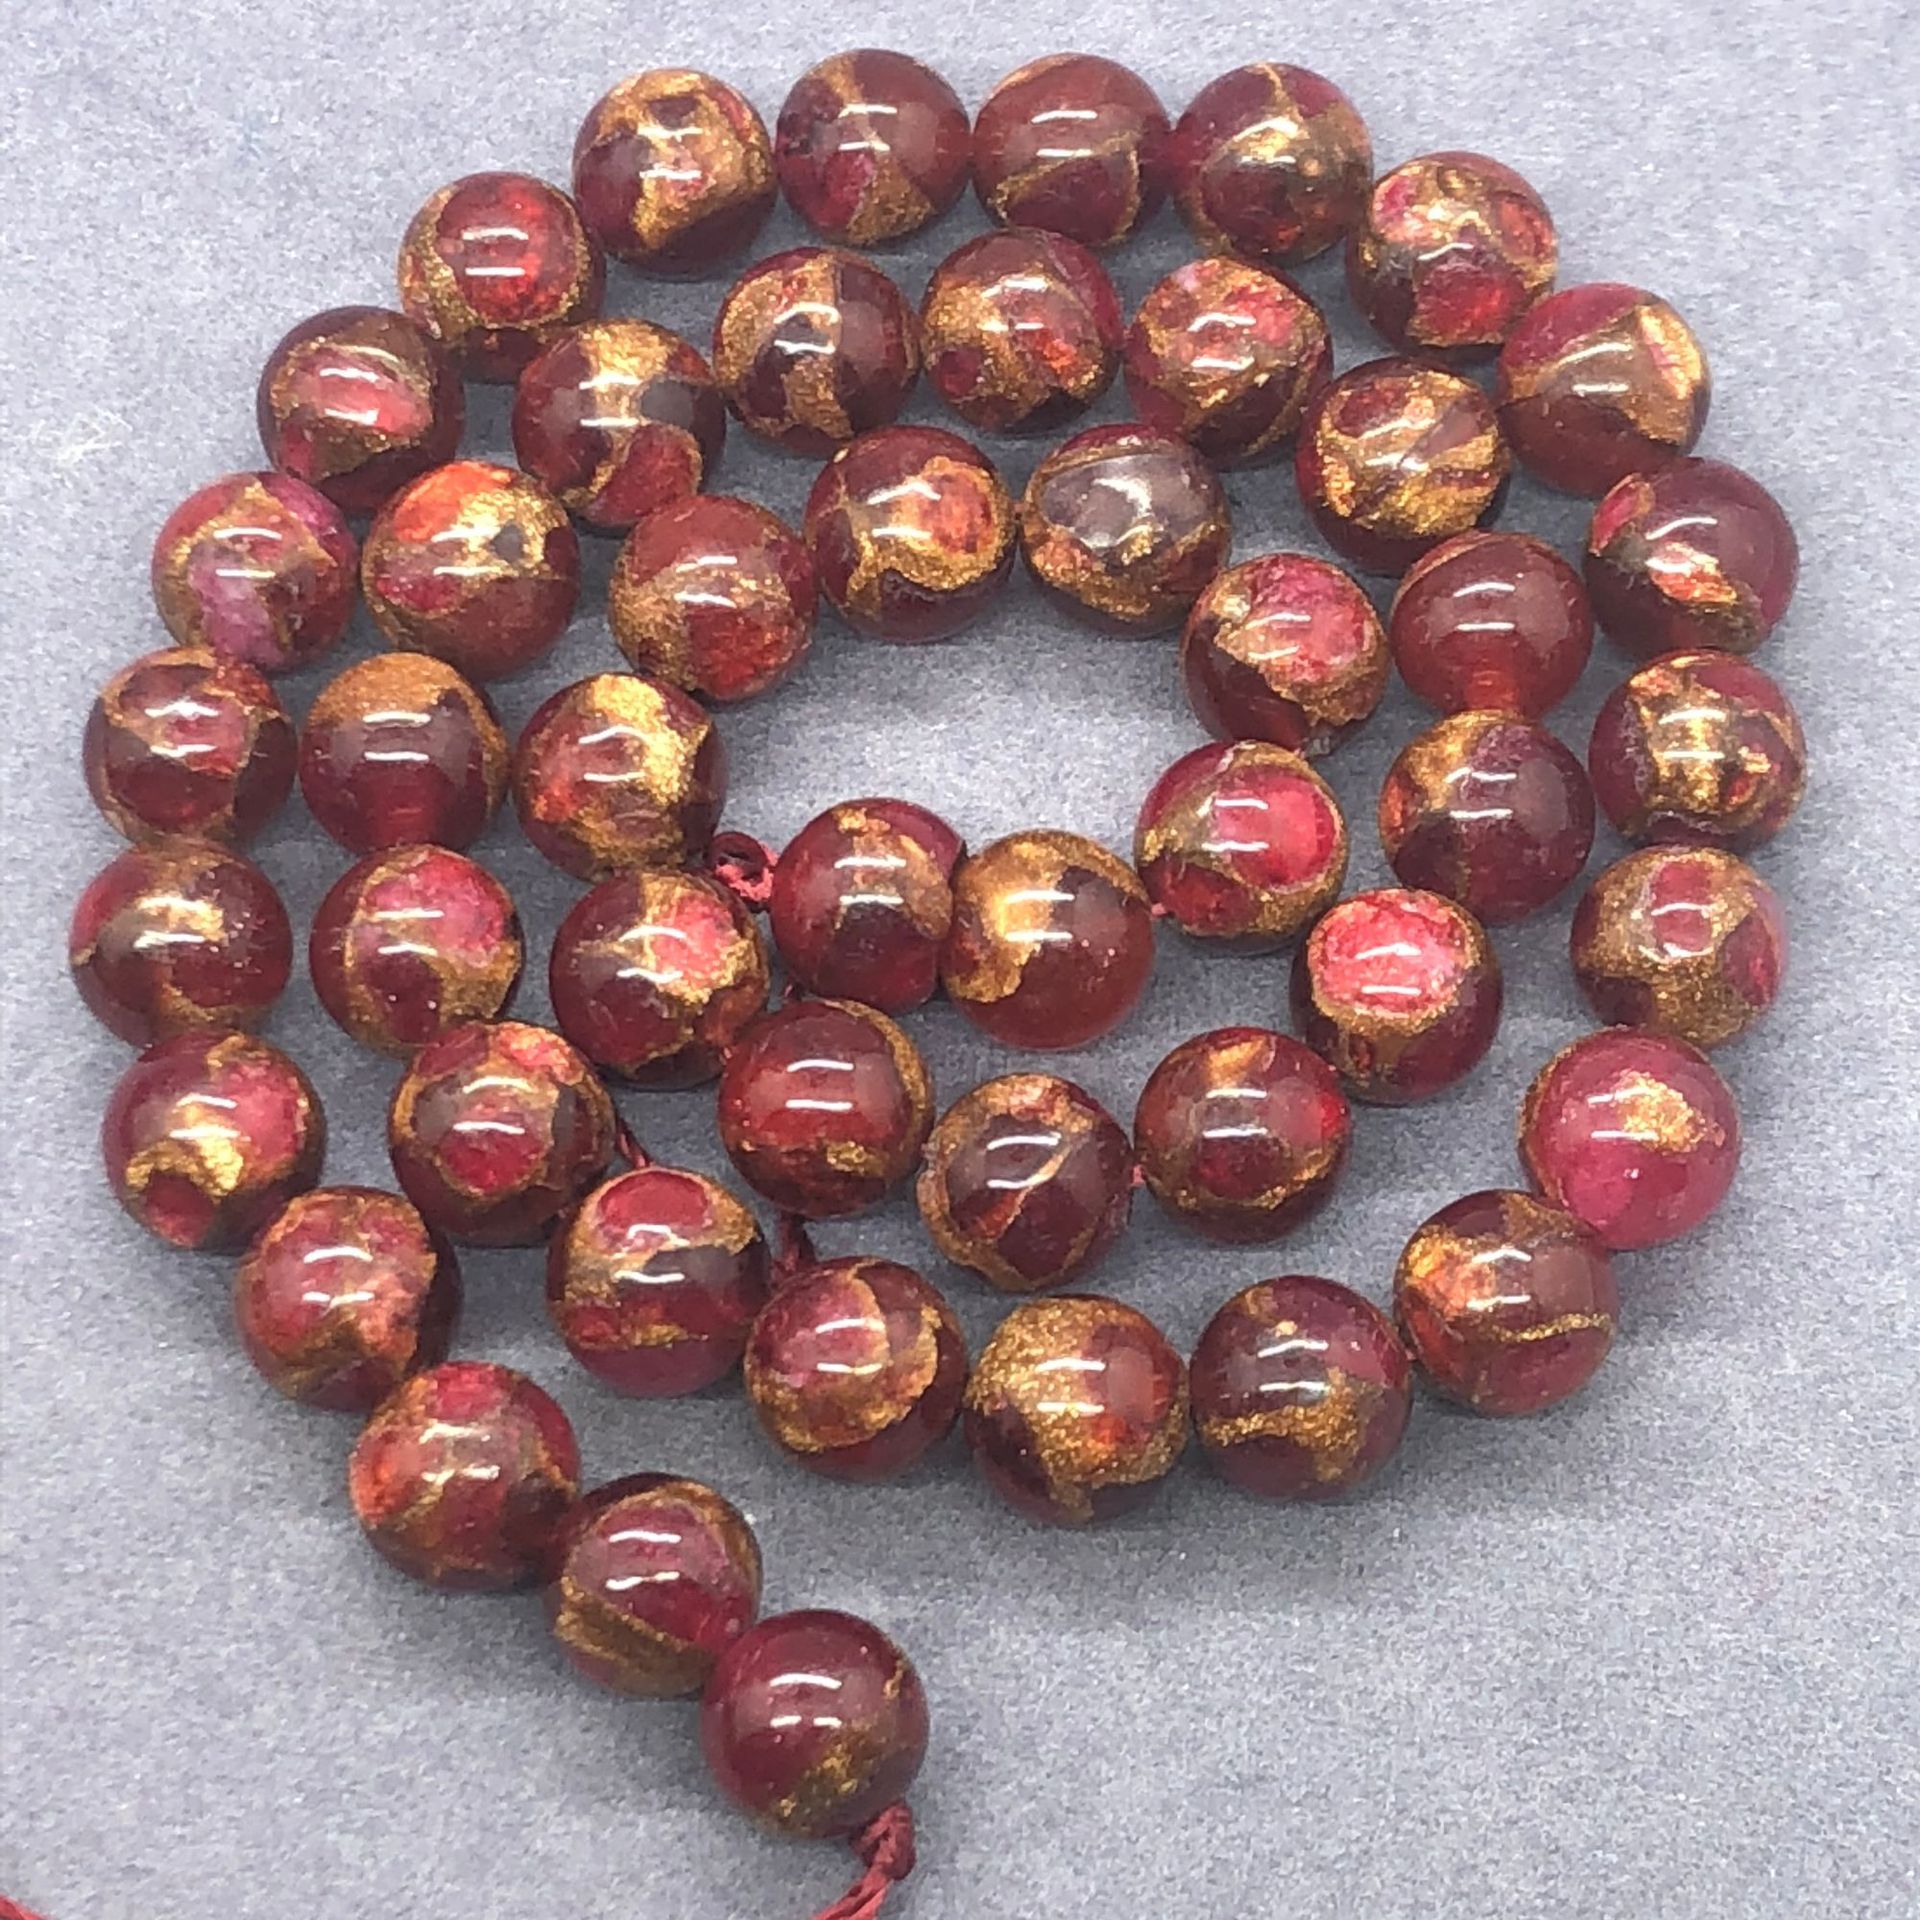 No. 2 red 10mm (≈38 pieces)